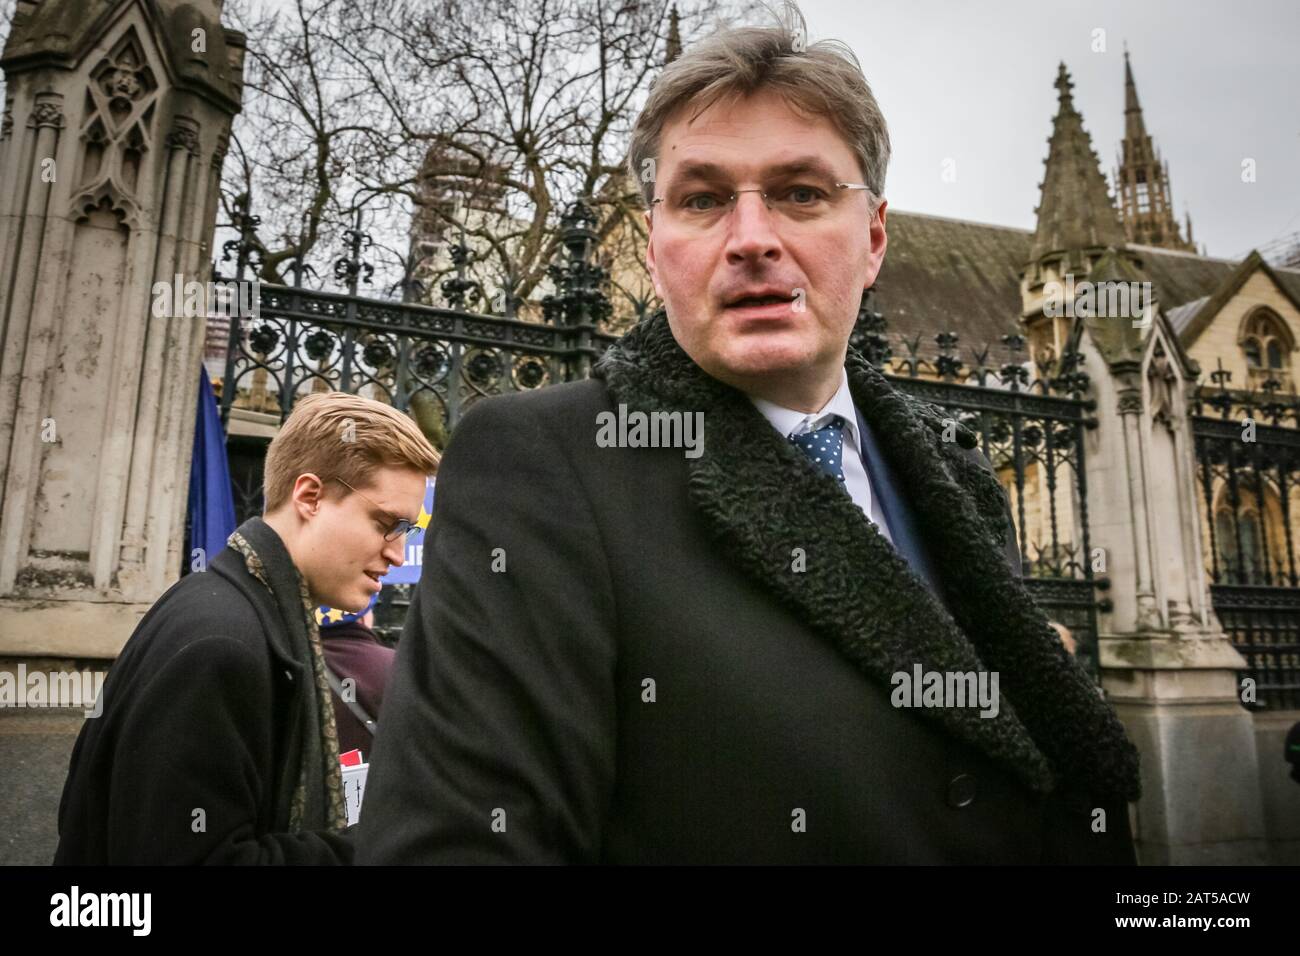 Westminster, London, 30th Jan 2020. Conservative MP and Brexiteer Daniel Kawczynski outside Parliament. Protesters from many pro European organisations, including Steve Bray's SODEM, Bath for Europe, Campaign to rejoin the EU and others have gathered outside Parliament in Westminster to celebrate the last full day Britain is inside the European Union Credit: Imageplotter/Alamy Live News Stock Photo